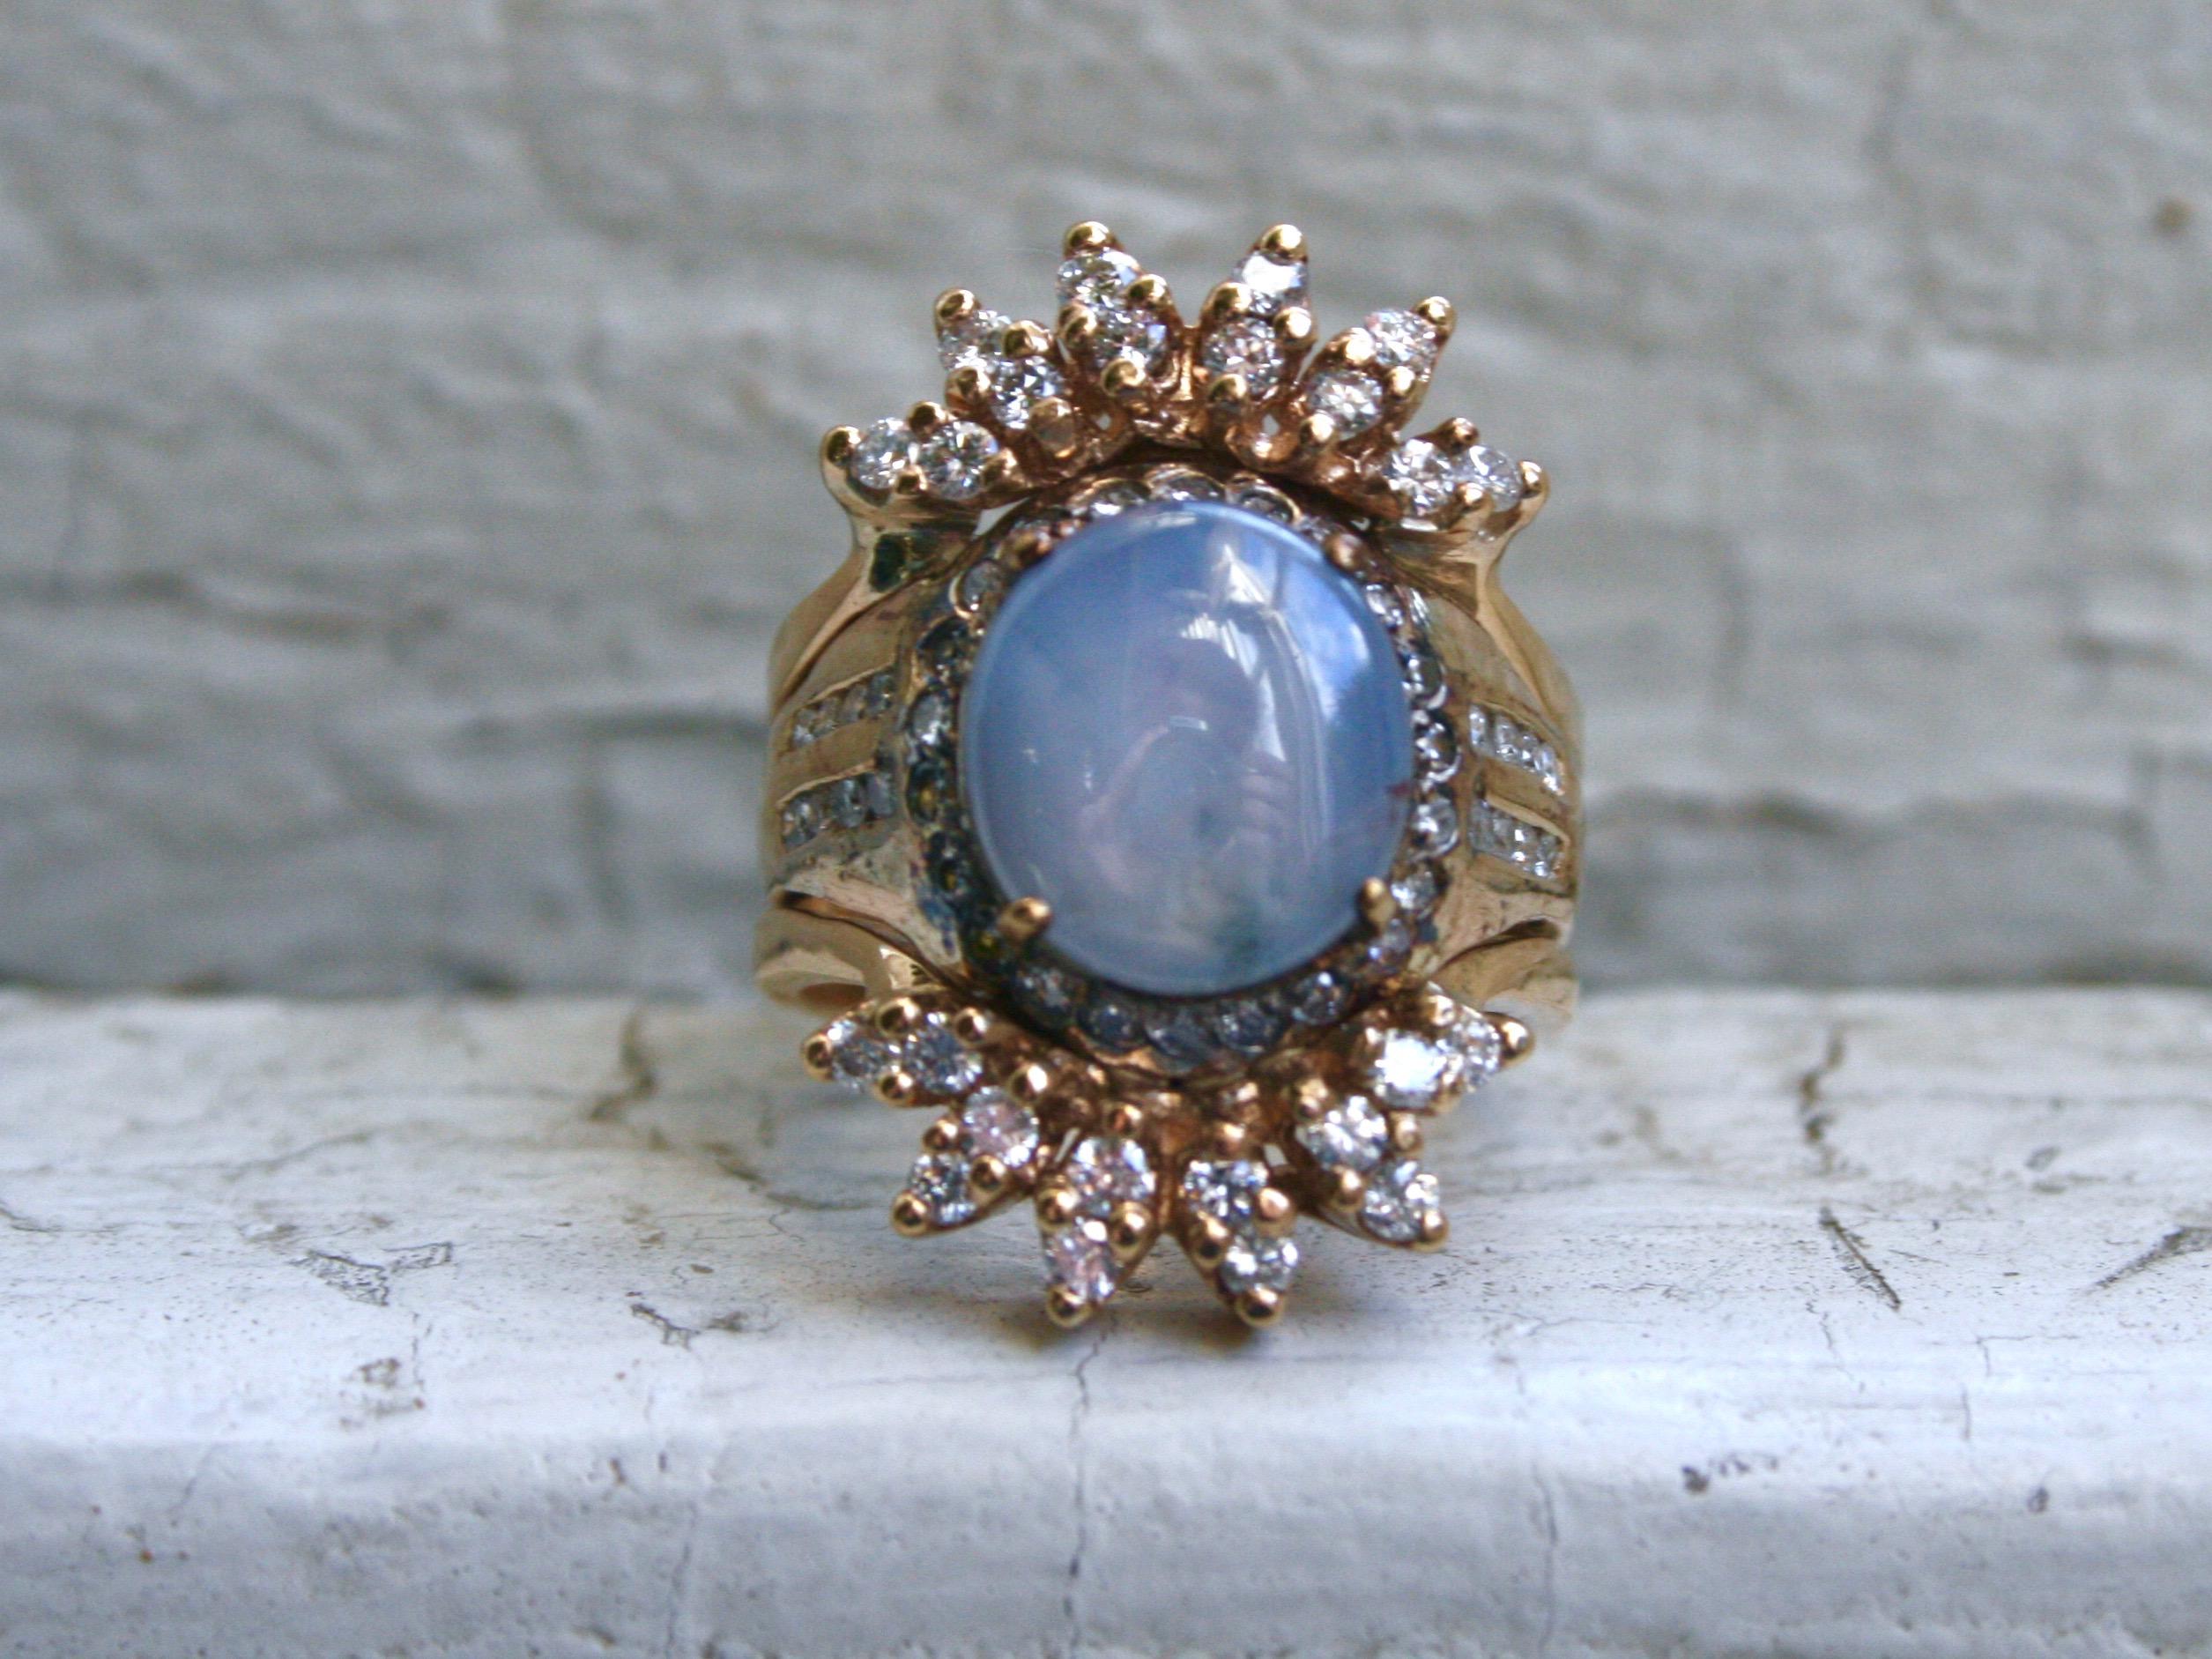 This Amazing Vintage Star Sapphire and DiamondRing  Engagement Ring is a truly special, one of a kind piece - and my new Favorite Piece!!  It's well crafted, the Sapphire is crazy gorgeous, and the diamonds don't hurt either!! Crafted in 14K Yellow